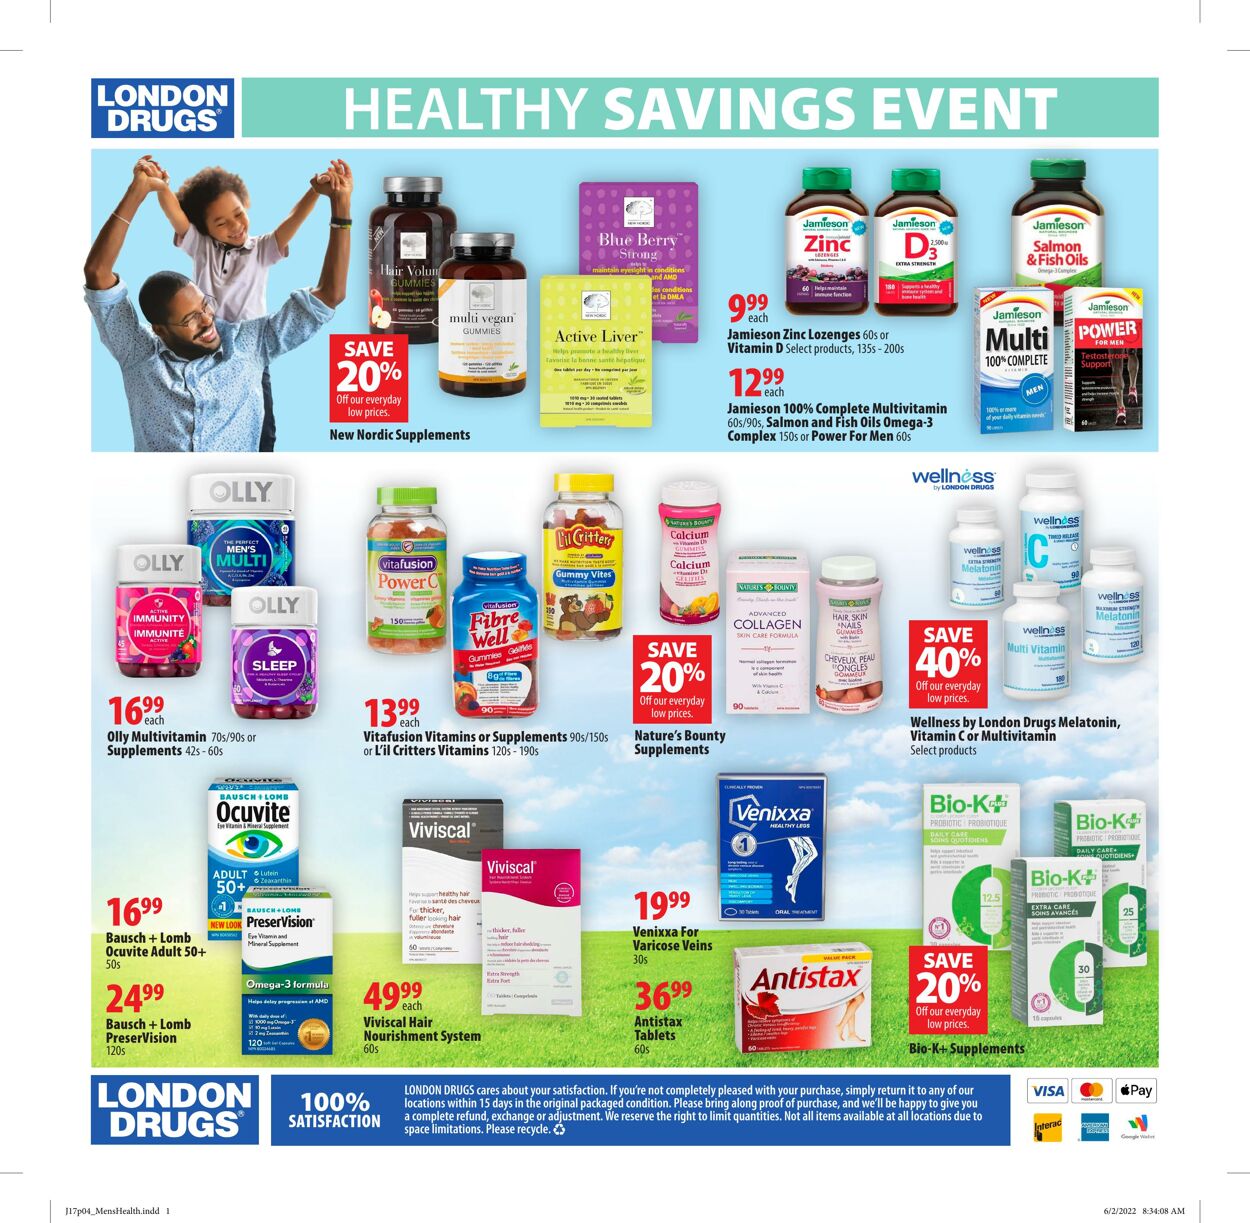 Circulaire London Drugs 17.06.2022 - 29.06.2022